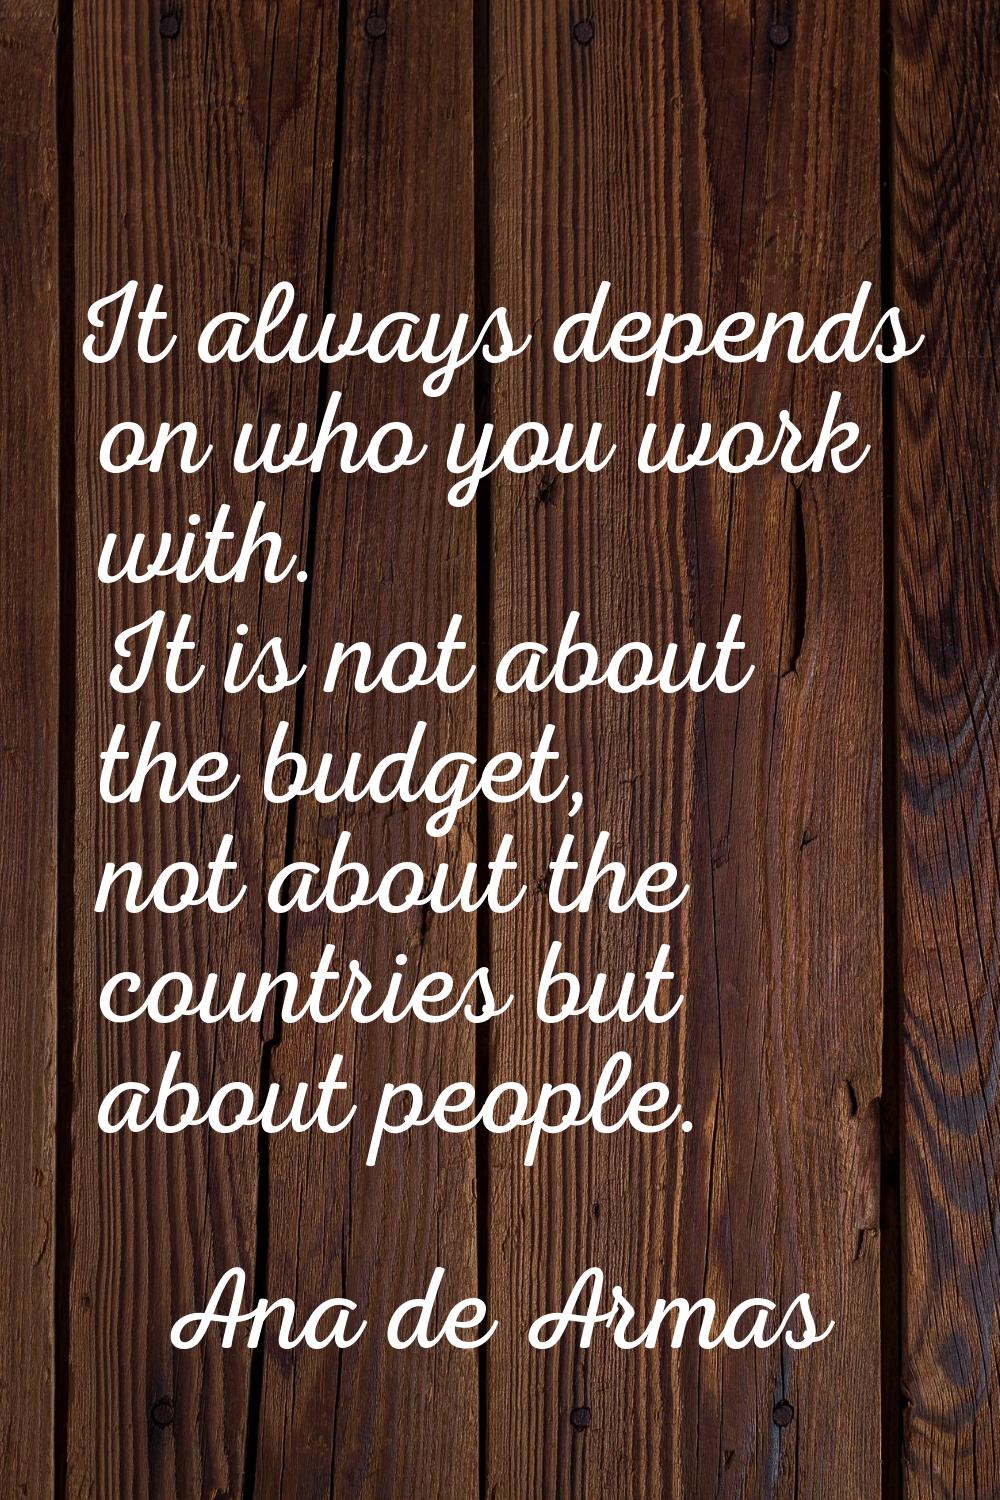 It always depends on who you work with. It is not about the budget, not about the countries but abo